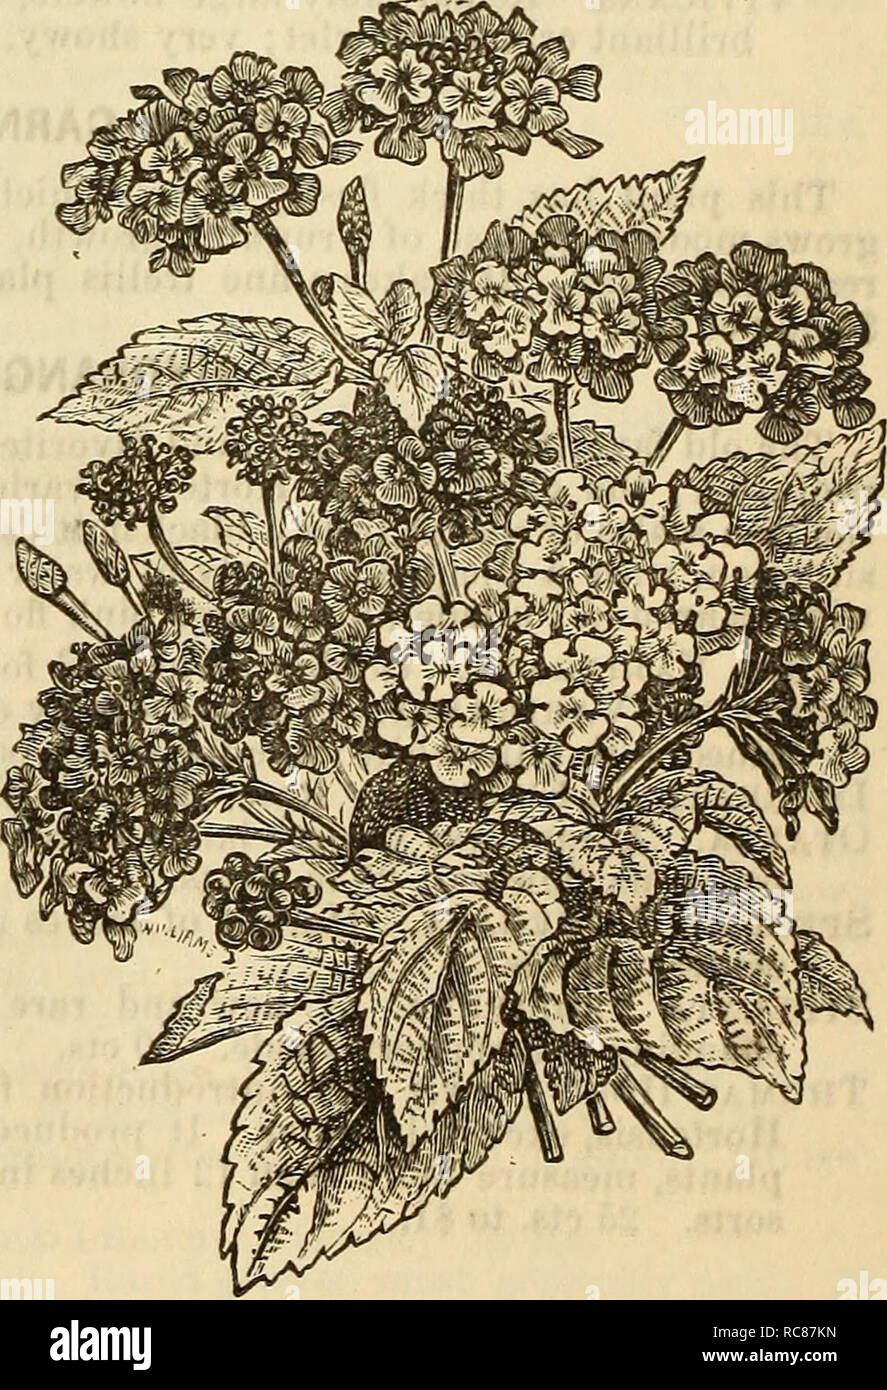 . Dreer's garden calendar : 1881. Seeds Catalogs; Nursery stock Catalogs; Gardening Catalogs; Flowers Seeds Catalogs. HYDRANGEA PANICULATA GRANDIFLORA. A hardy variety lately introduced, of great merit; it endures the heat and cold of our climate extremely well. Elongated flowers of snowy white, often a foot long, which are produced in the greatest profusion, and continue from August to November. The finest hardy shrub of recent introduction. 50 cts.; extra strong, $1. IMANTOPHYLLUM. MlNlATUM. Resembling the Amaryllis in foliage; bearing large clusters of conspicuous buff orange-colored flower Stock Photo